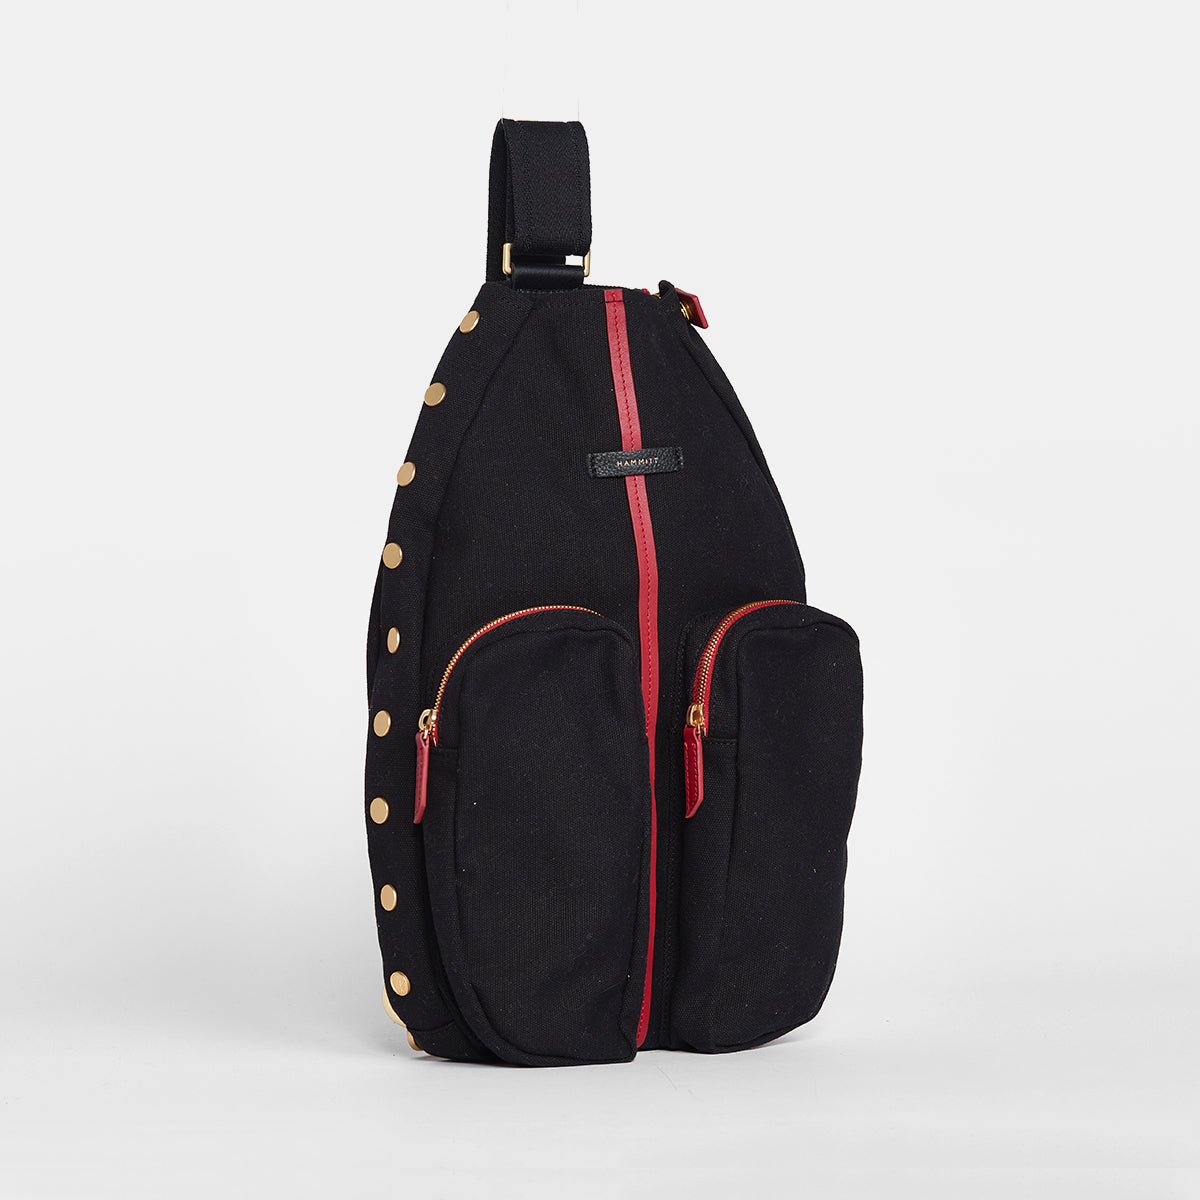 Courtside-Sling-Black-BG-Red-Zip-Front-View